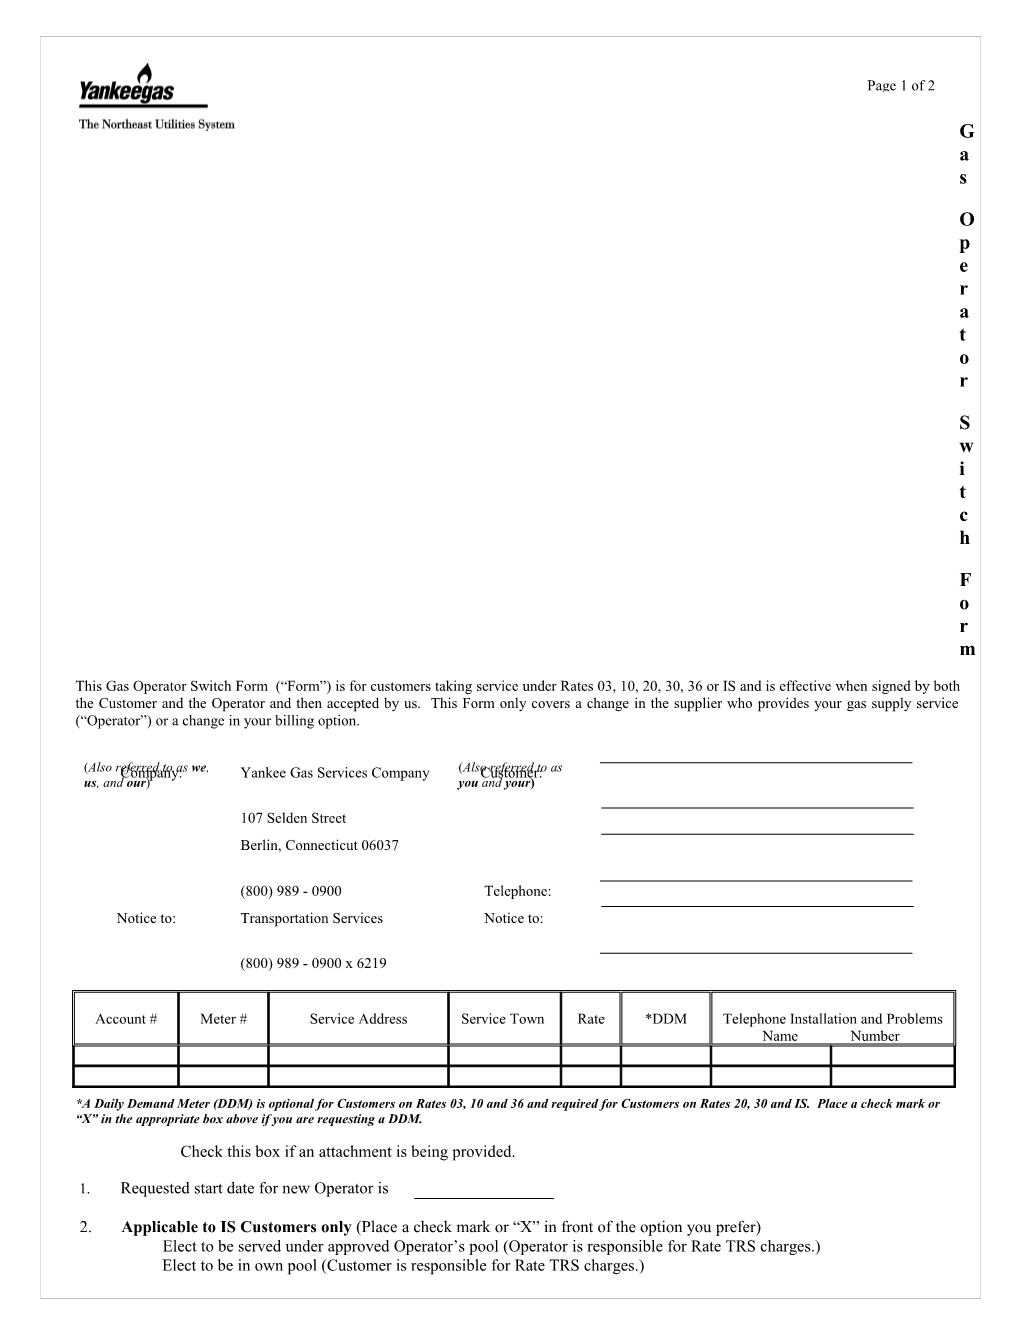 Gas Operator Switch Form